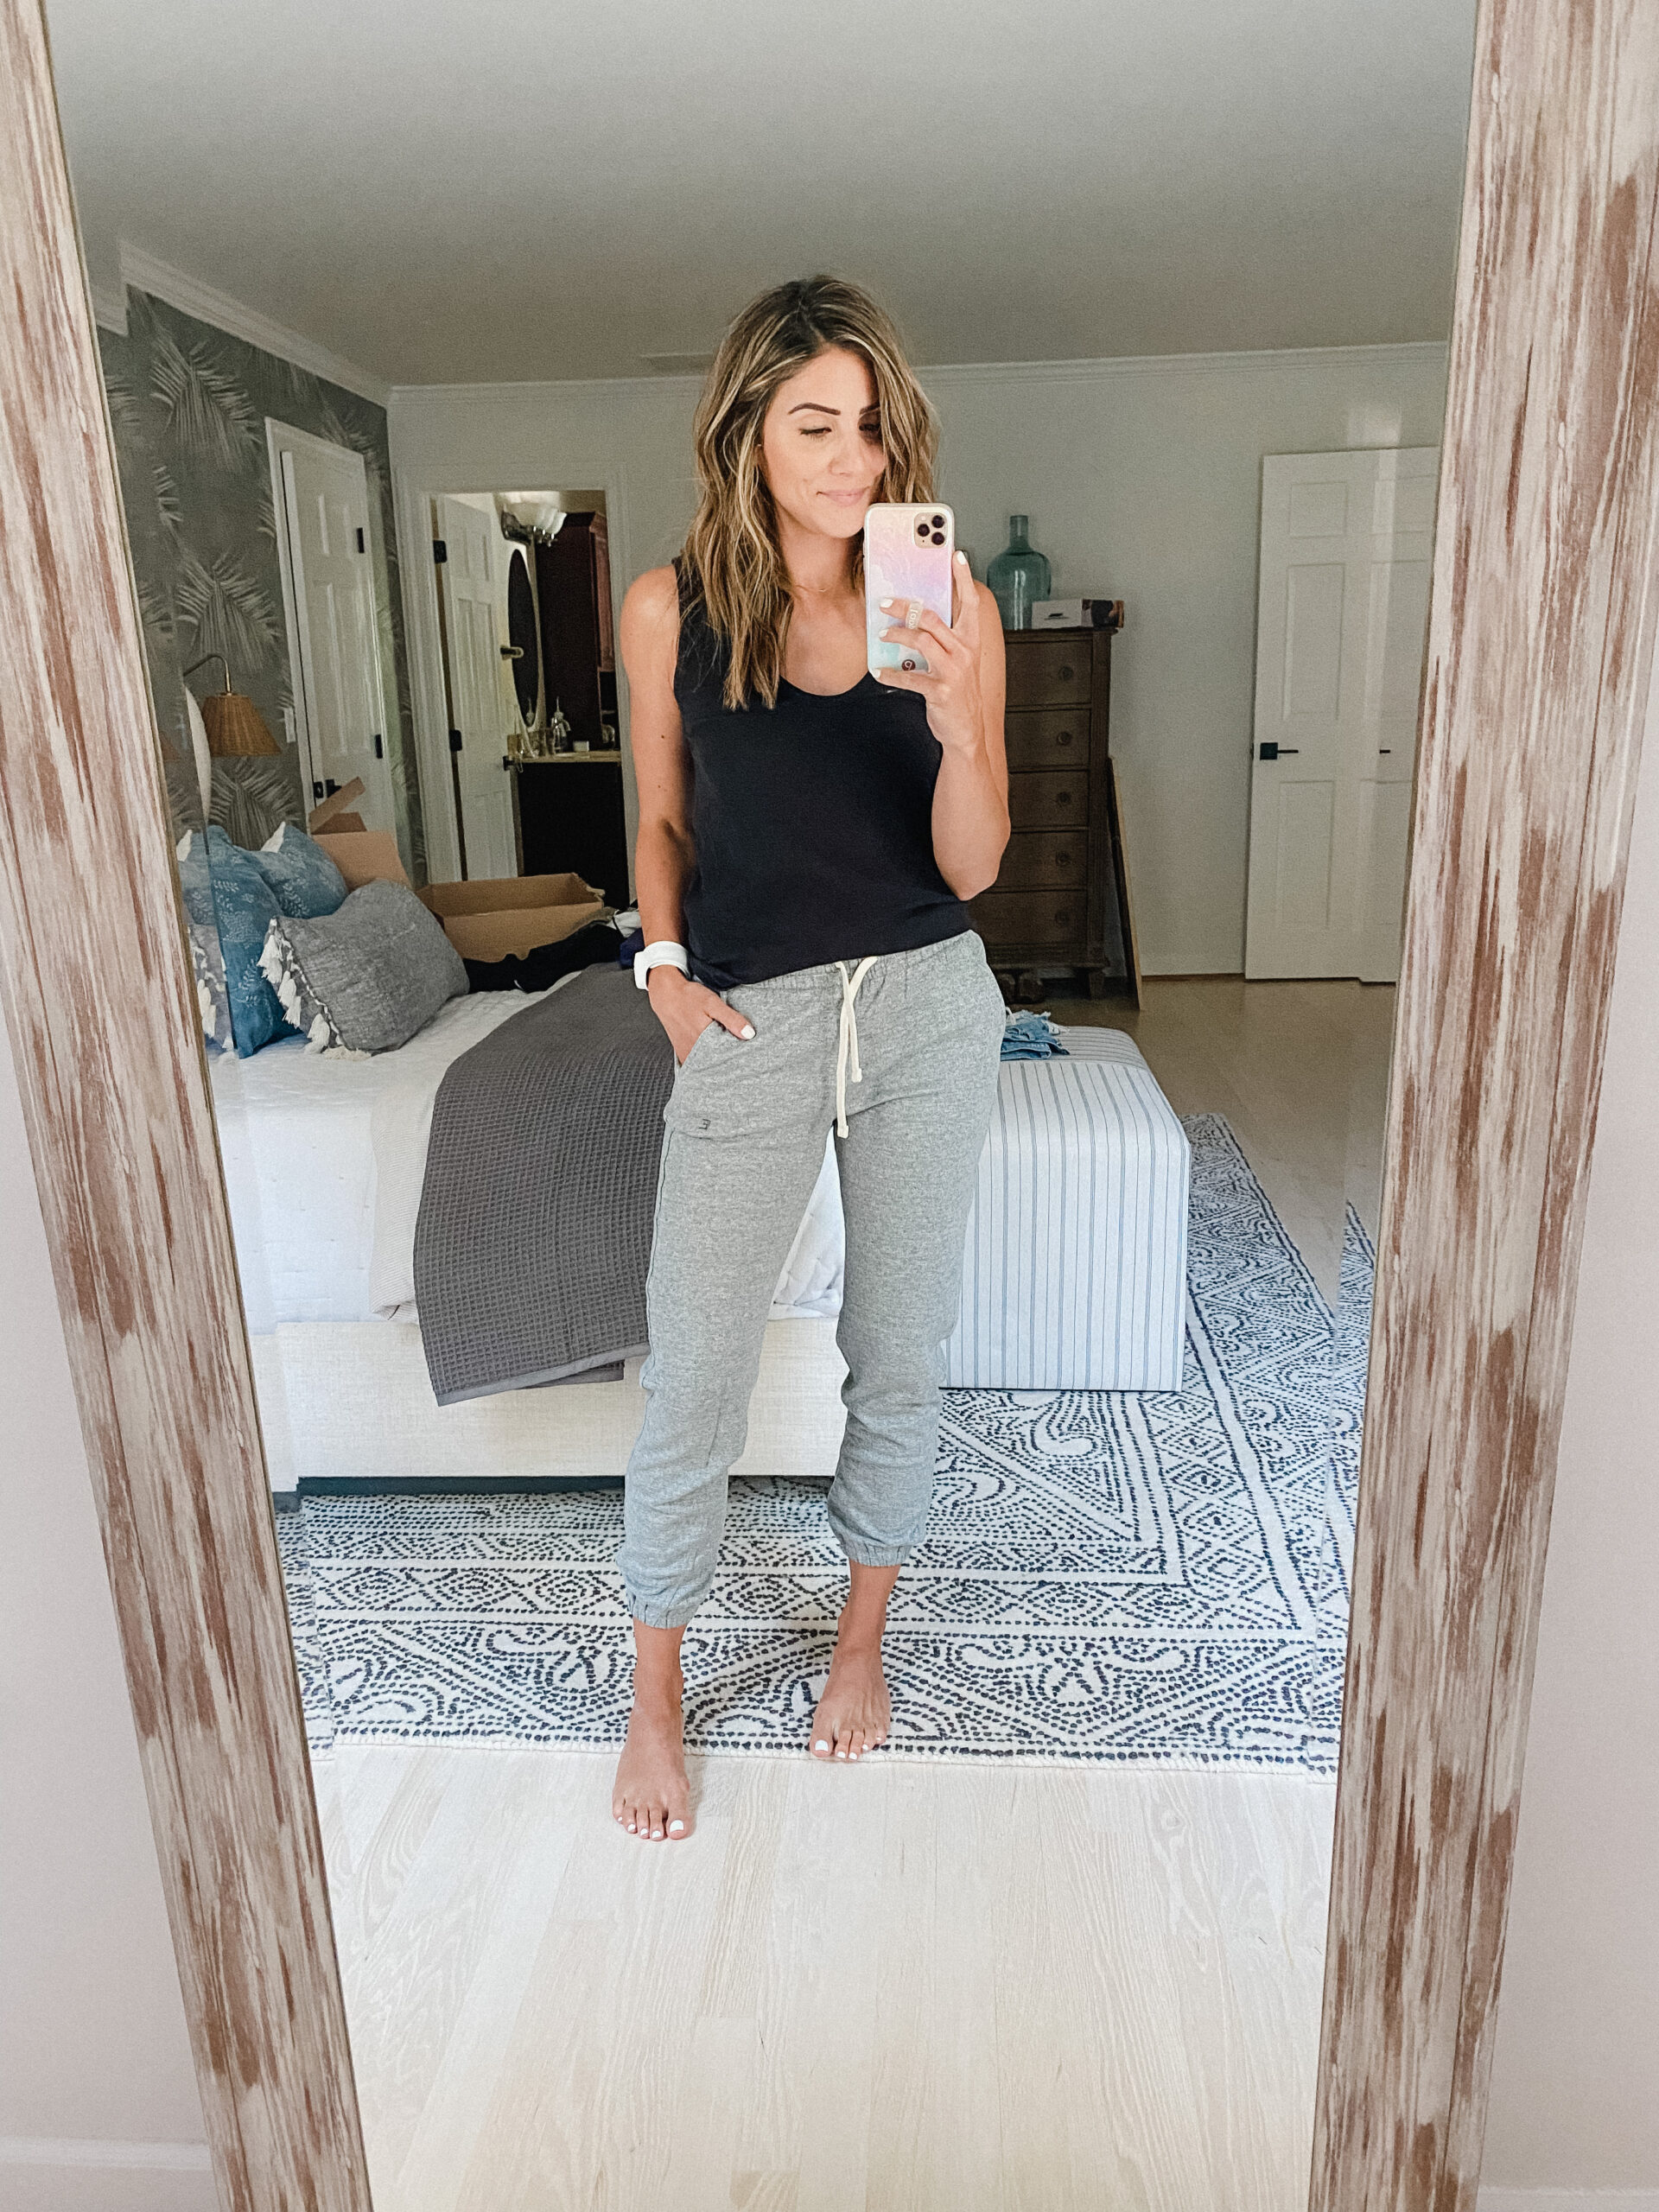 Connecticut life and style blogger Lauren McBride shares an Everlane try on featuring classic items for your summer closet.